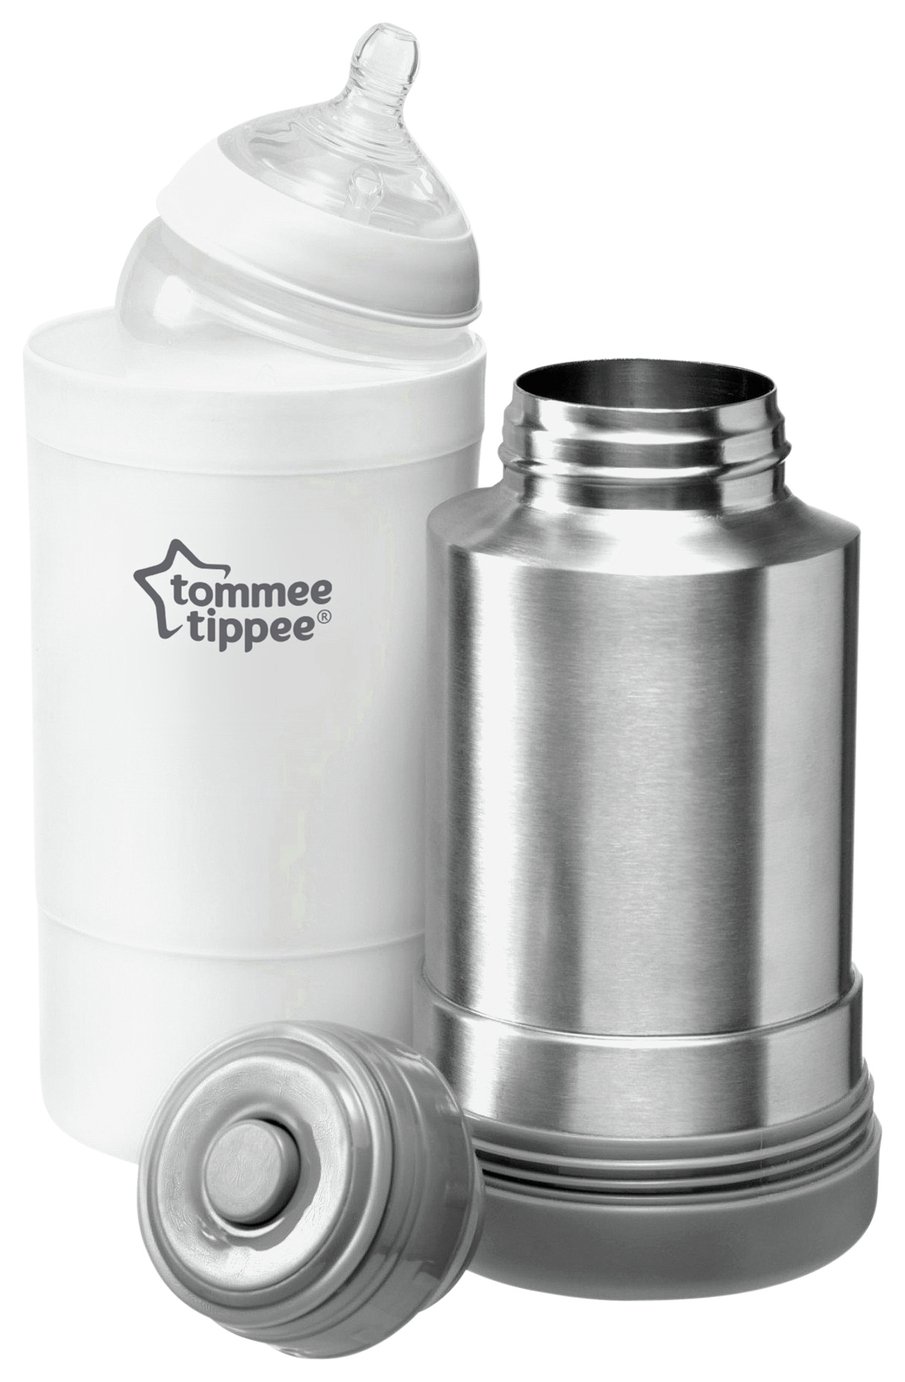 Tommee Tippee Travel Bottle & Food Warmer. Review